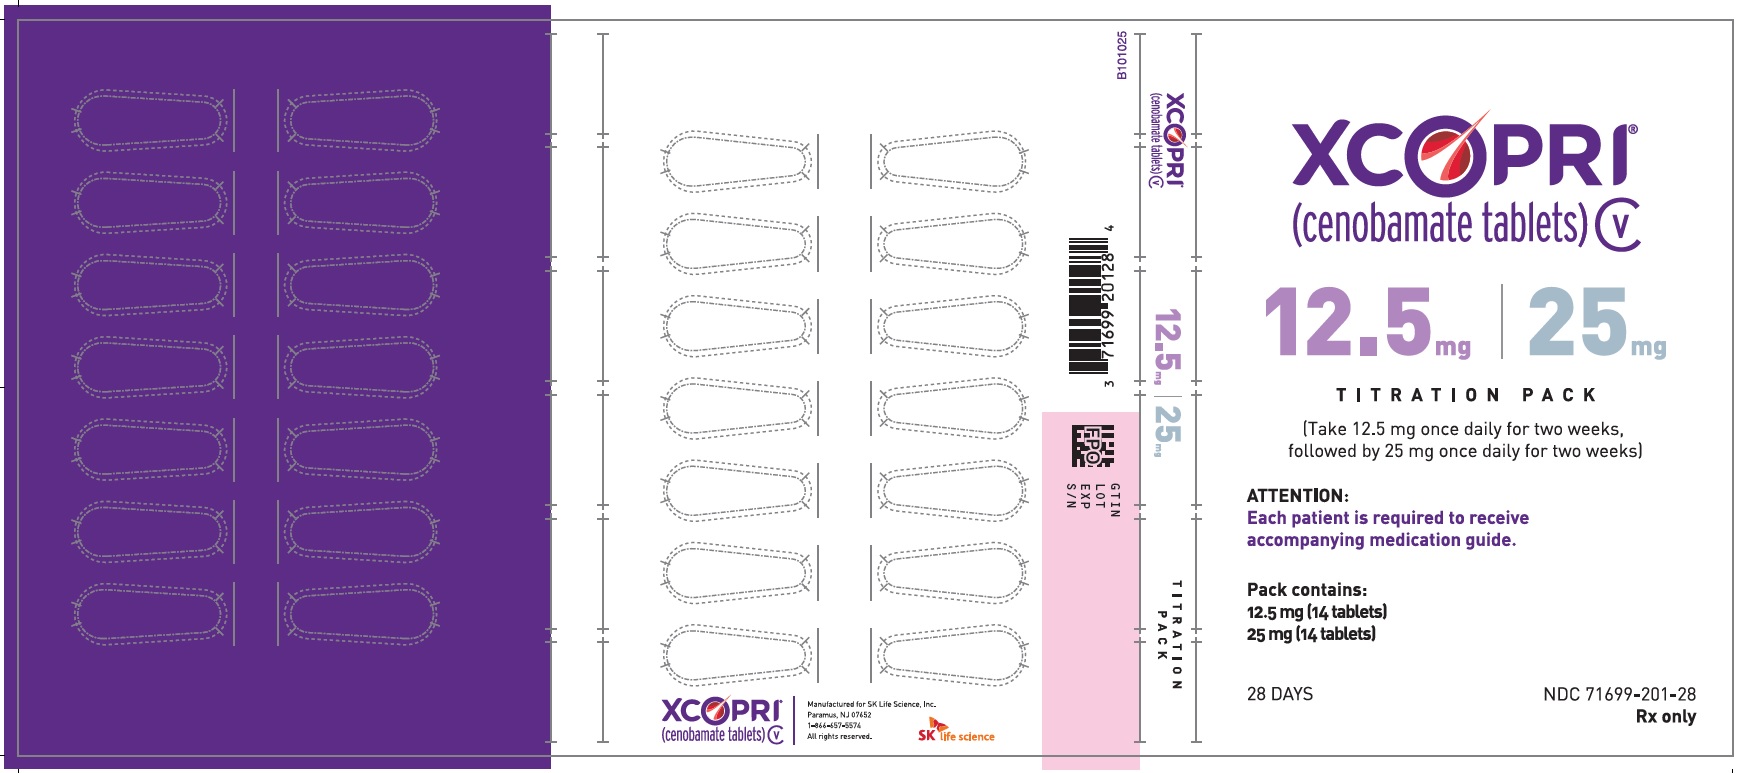 12.5 mg 14-count and 25 mg 14-count Titration Pack Label (Back)